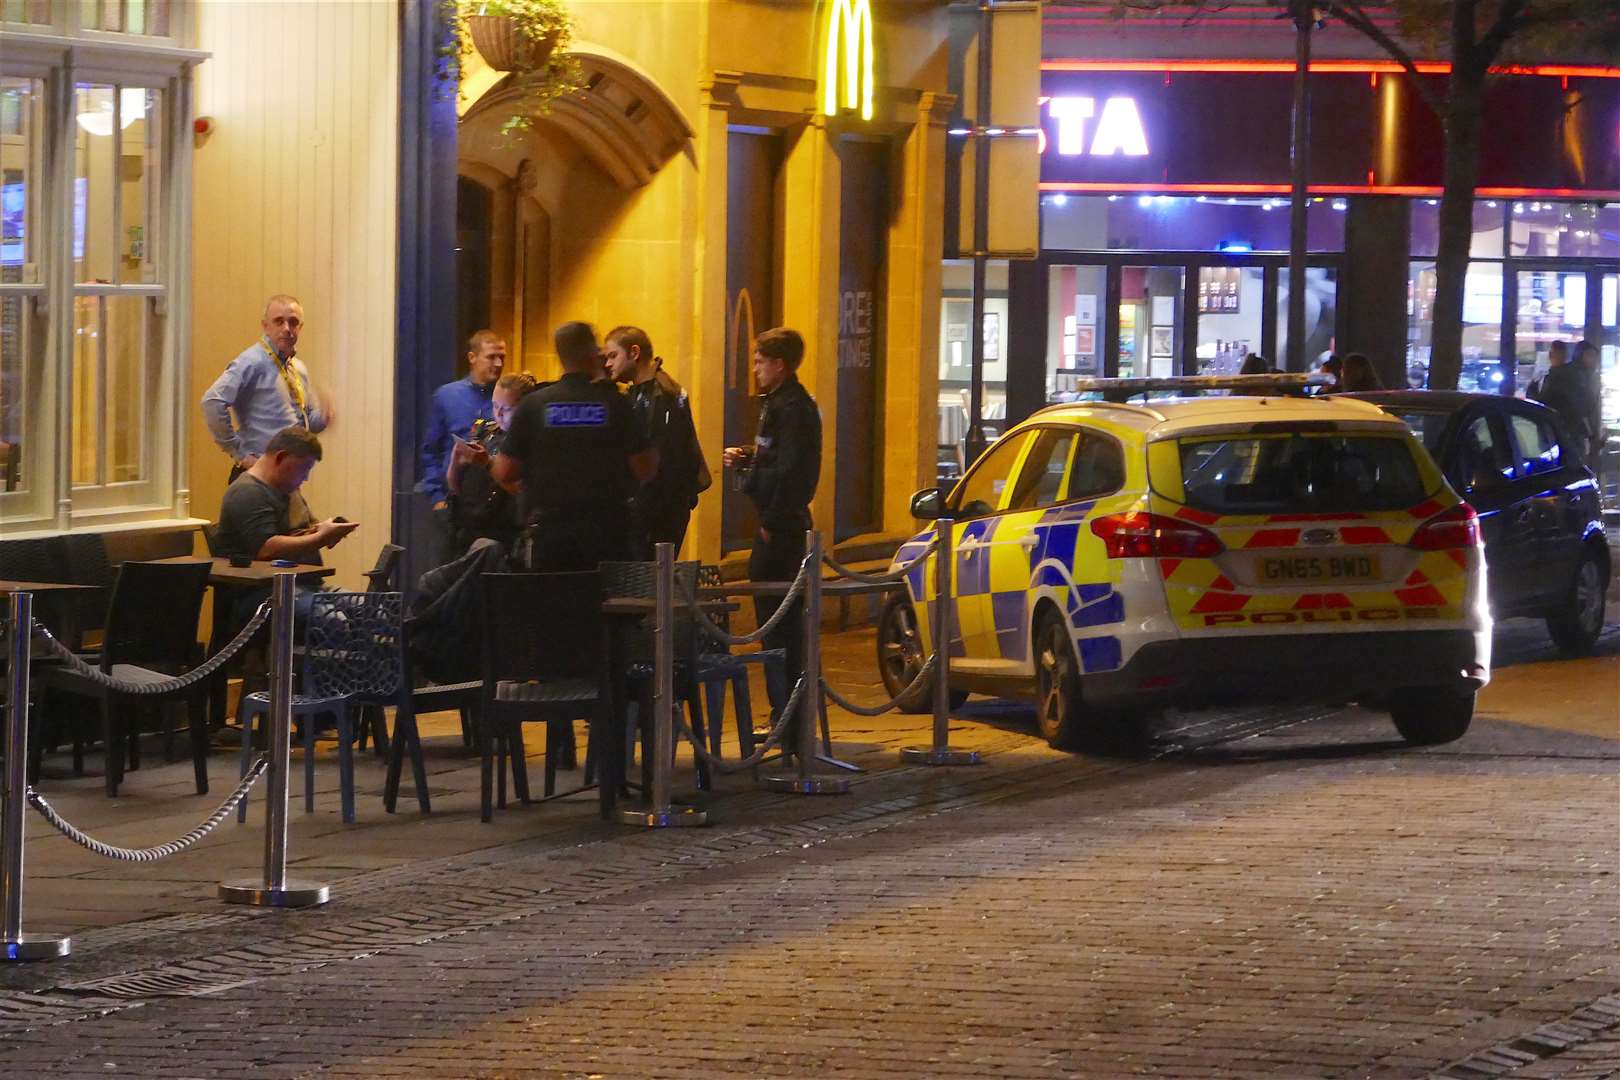 Police were called to The Robert Pocock last night after a man was attacked by thugs